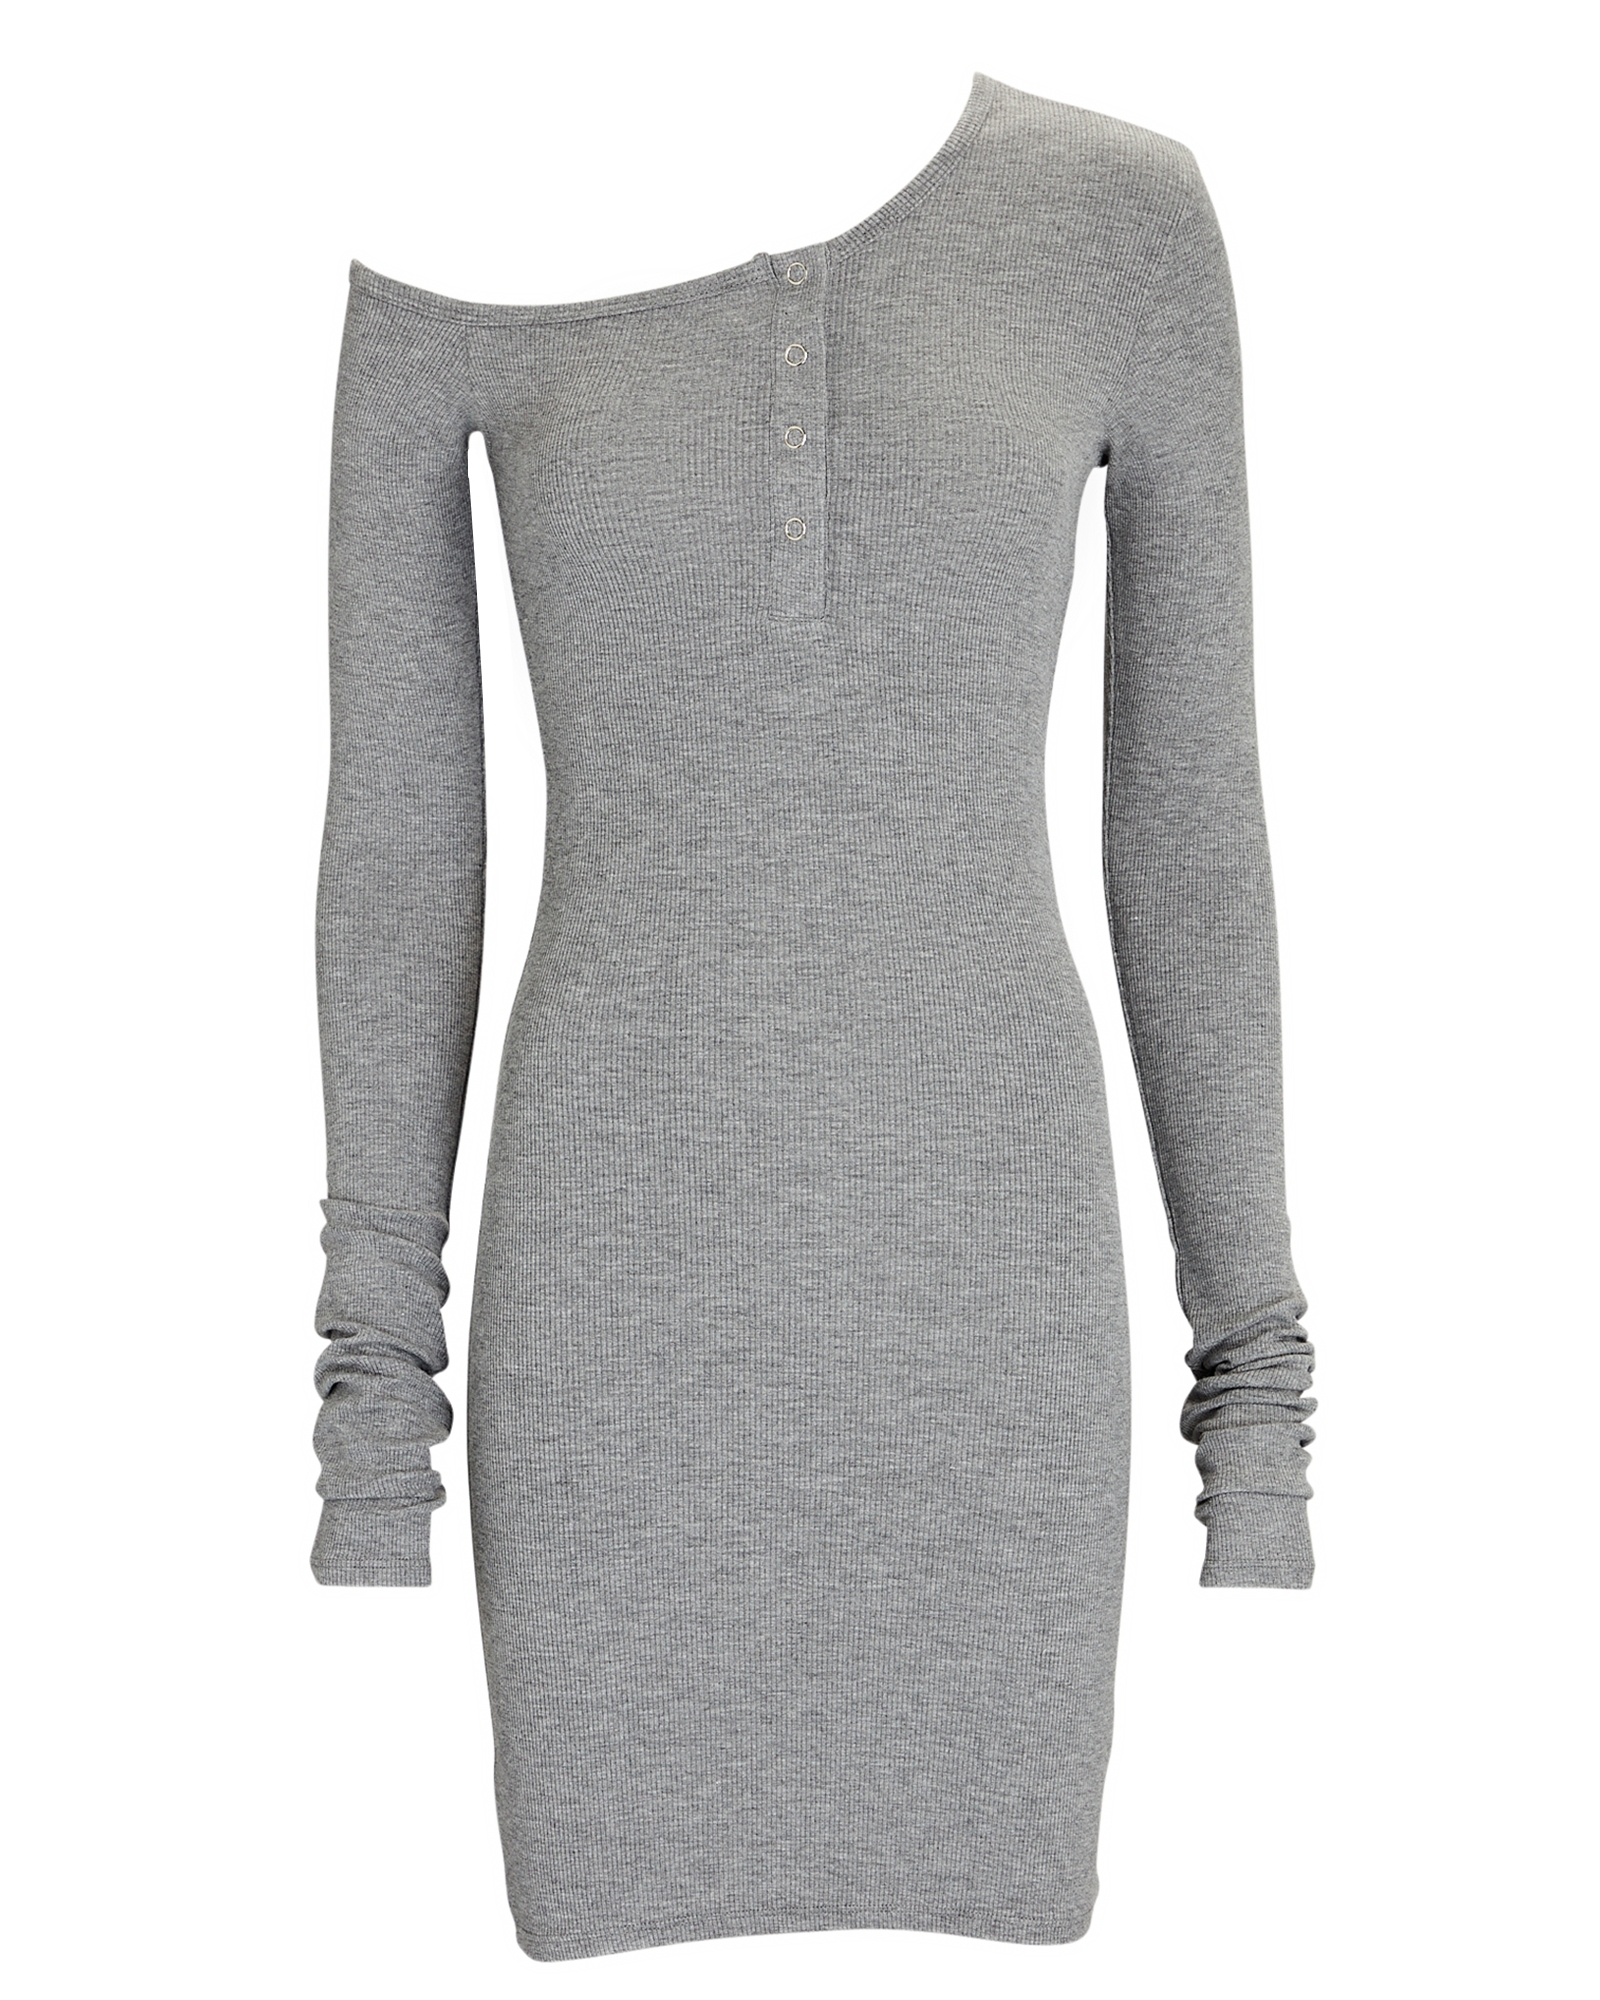 The Line By K Rory One-Shoulder Henley Dress | INTERMIX®